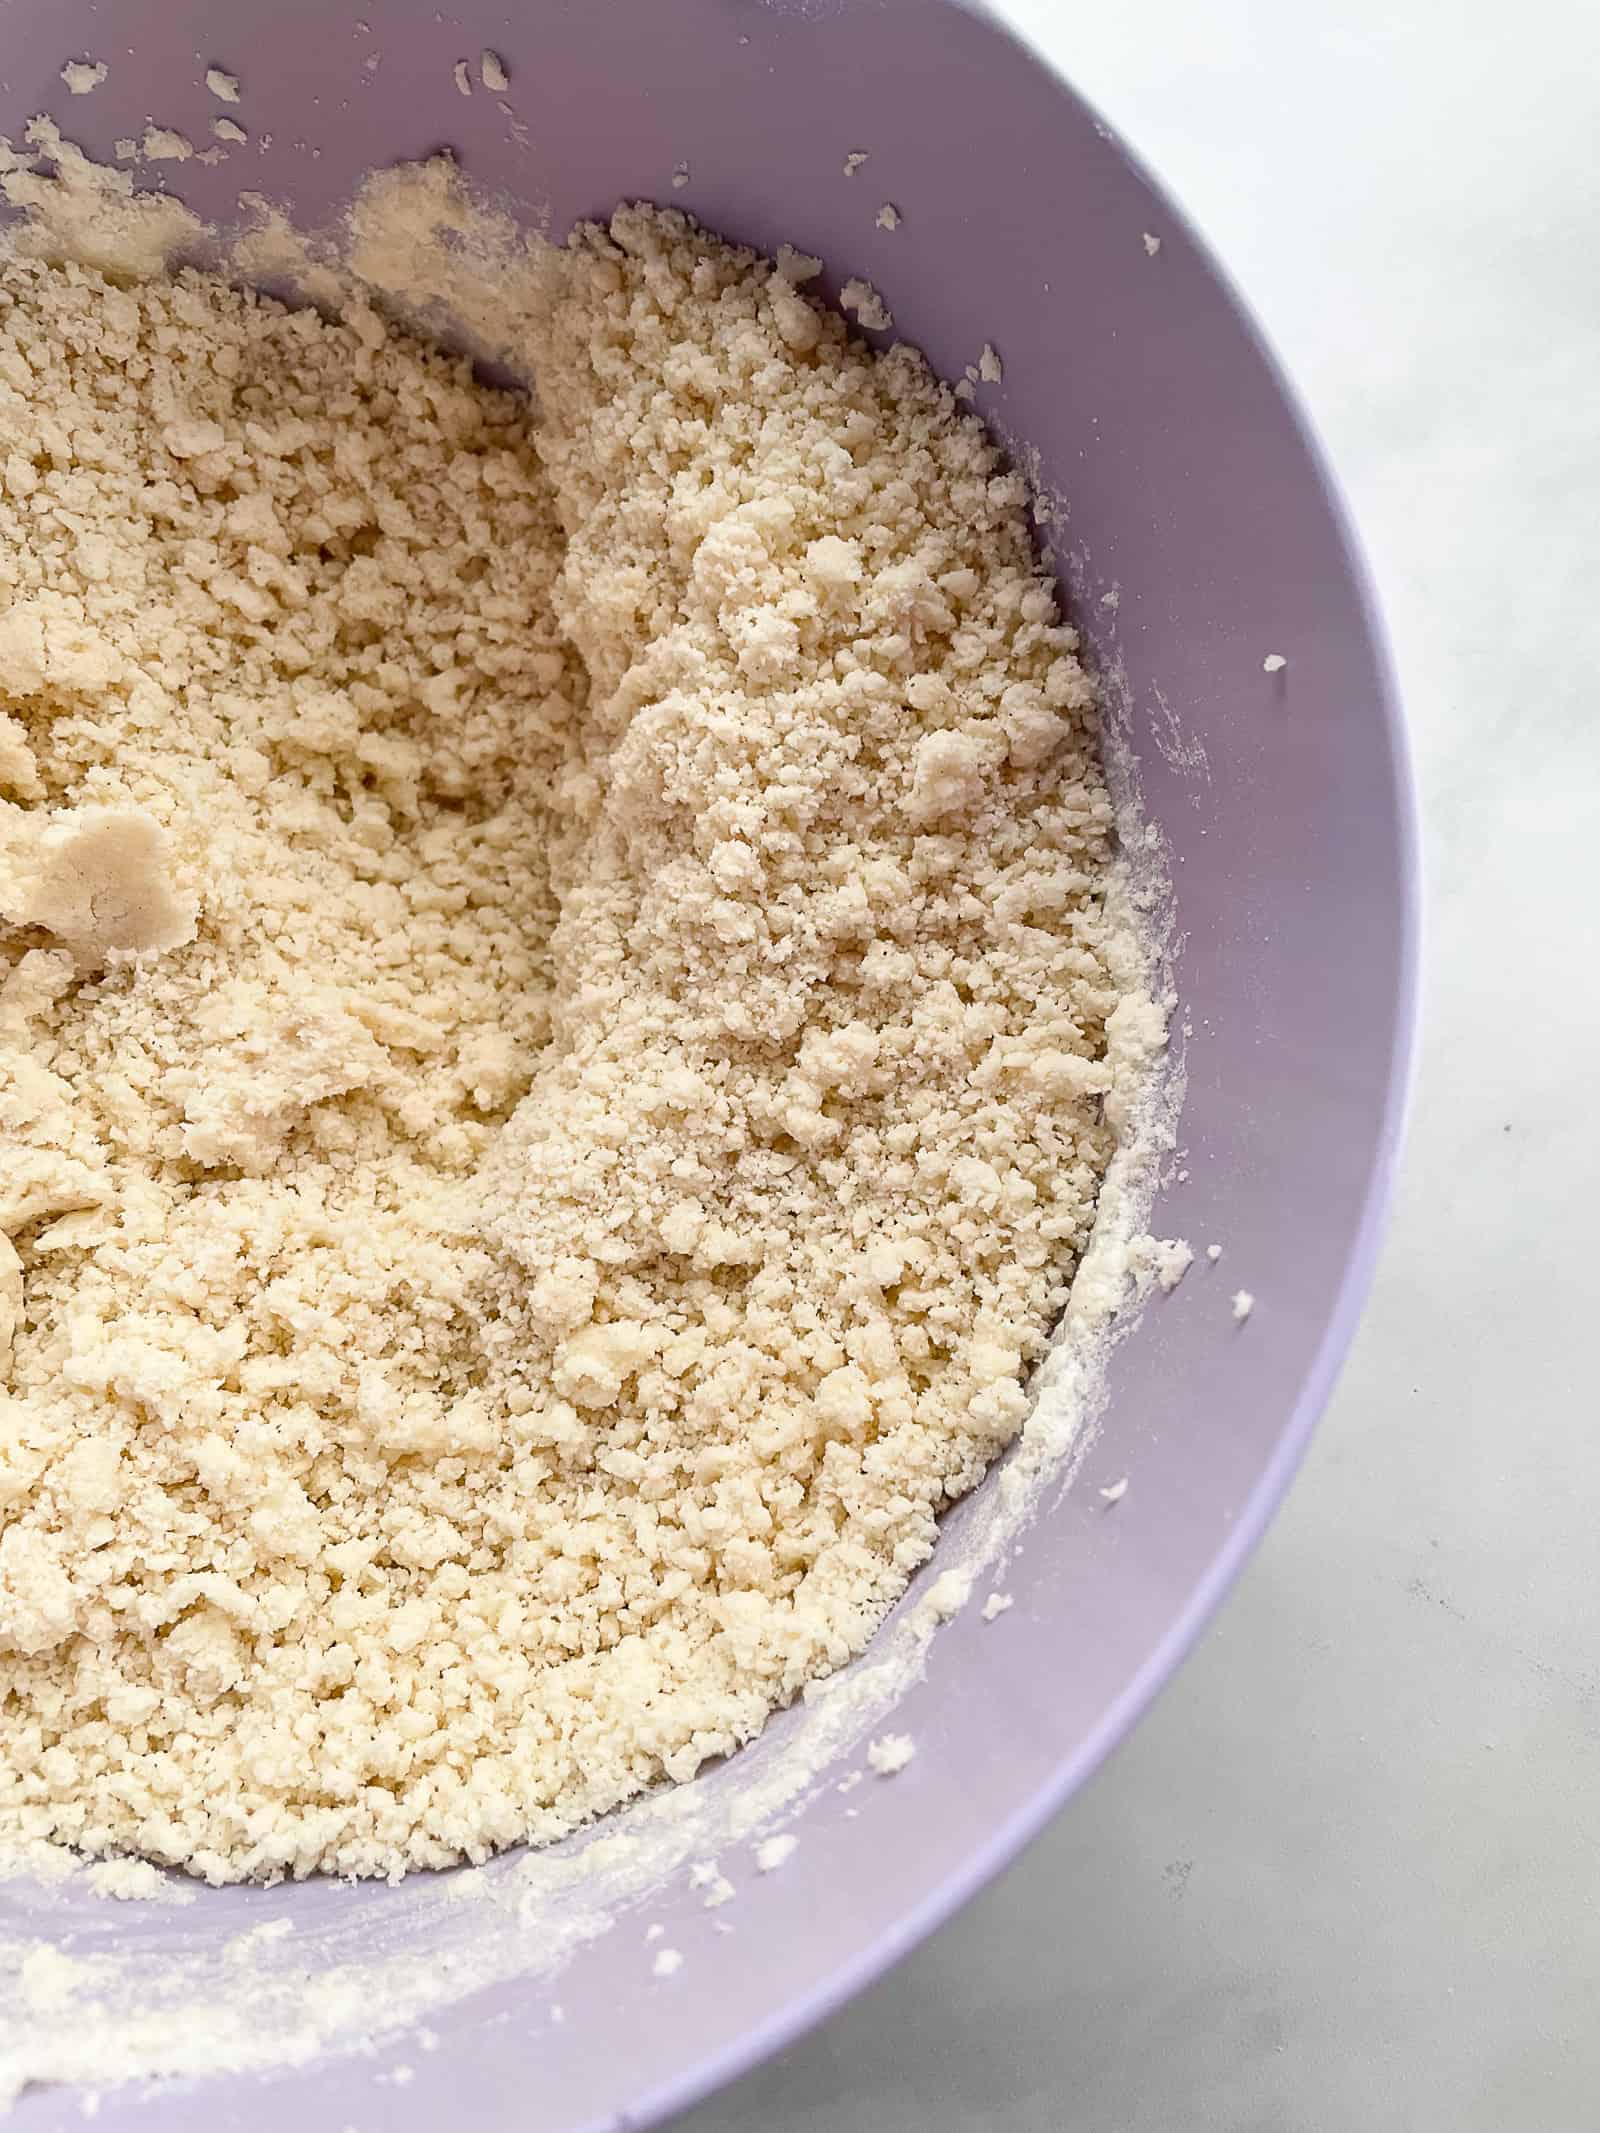 Crumbly gluten-free shortbread dough in a bowl.